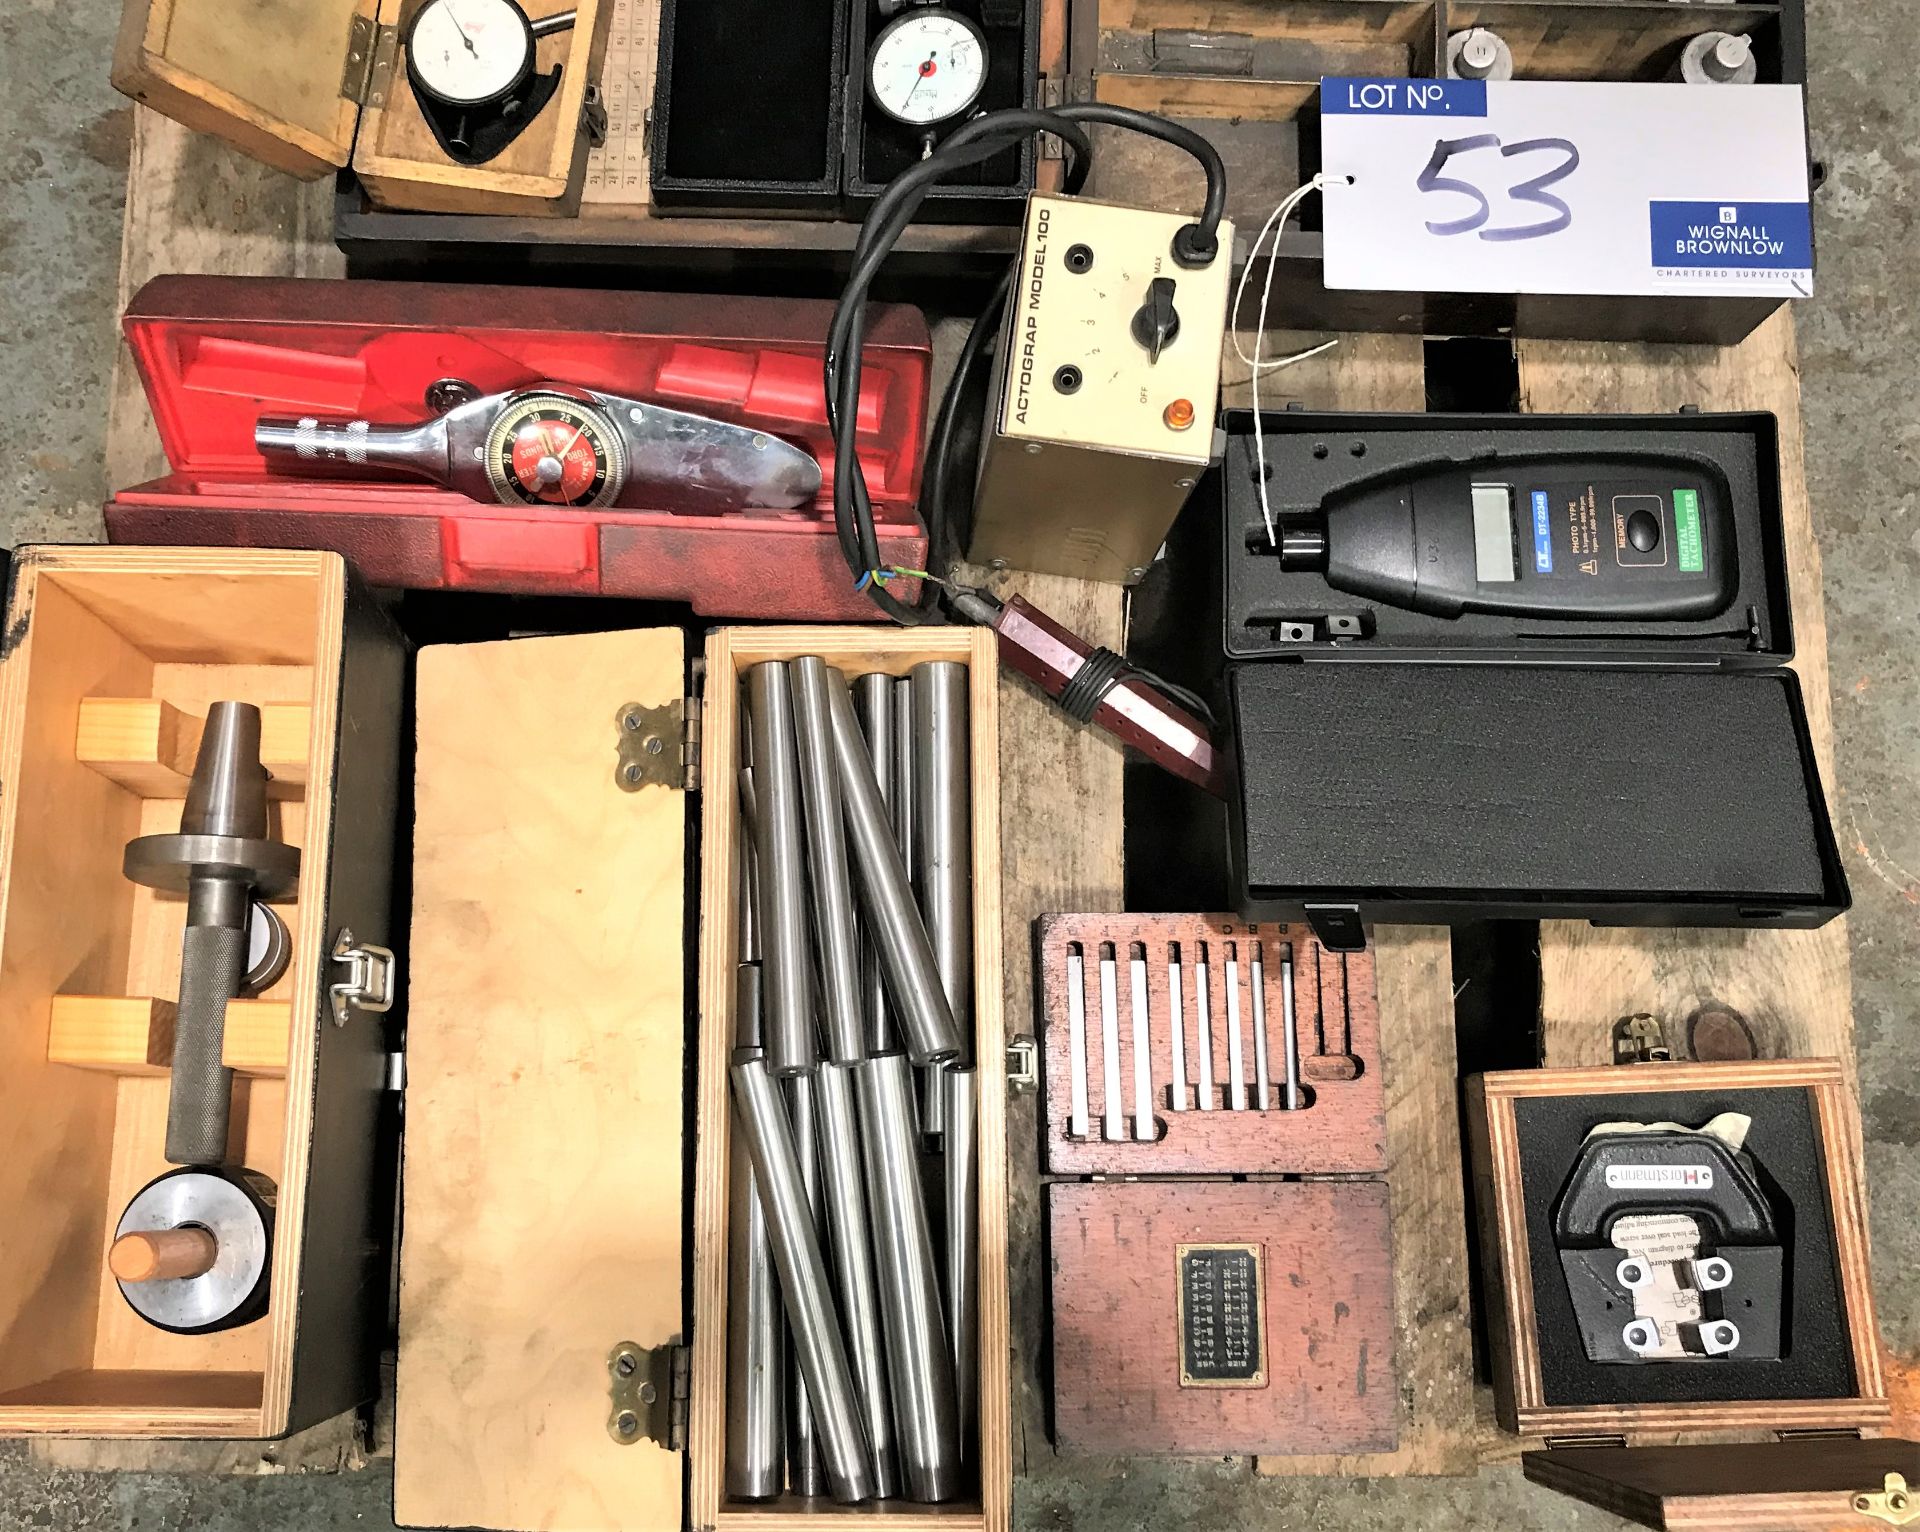 A Quantity of Miscellaneous Tools and Equipment. - Image 3 of 3